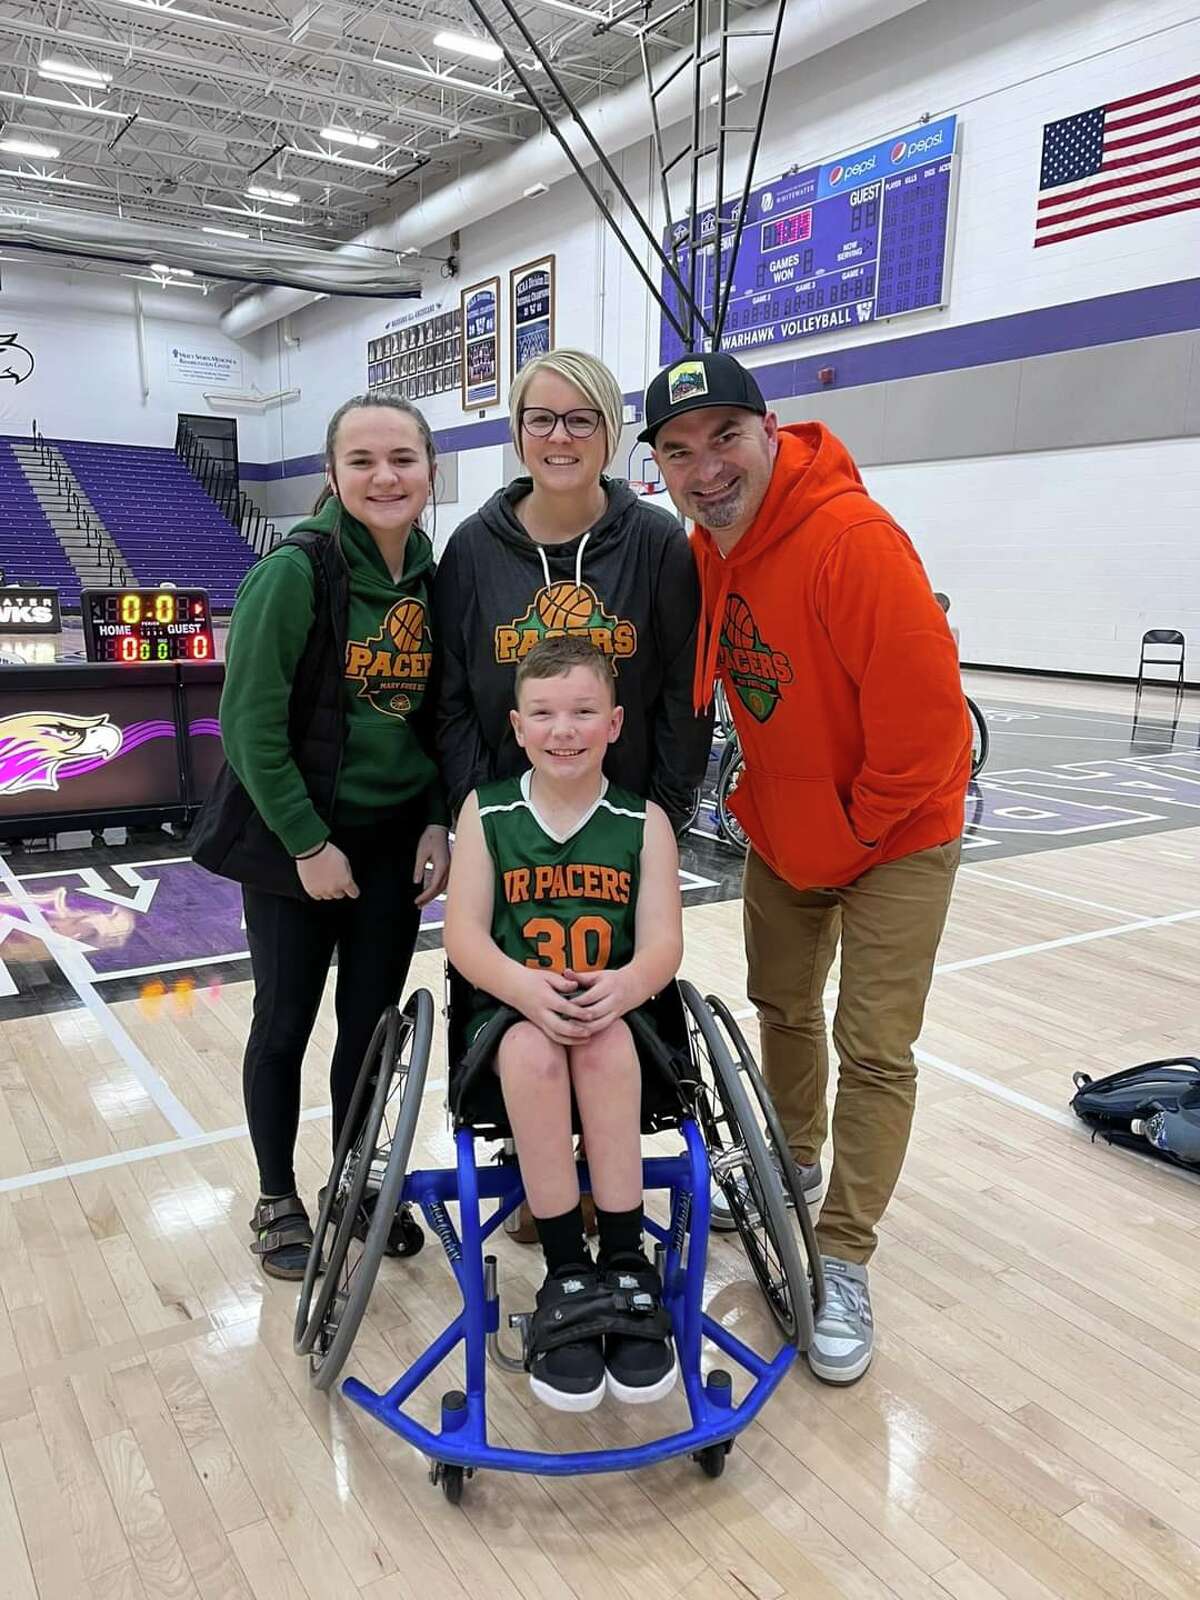 Pictured with Chase Fuller, 11, of  Big Rapids are three members of his family with, from left, Kennadi Fuller (sister), Sarah Fuller (mom) and Kenny Fuller (dad),